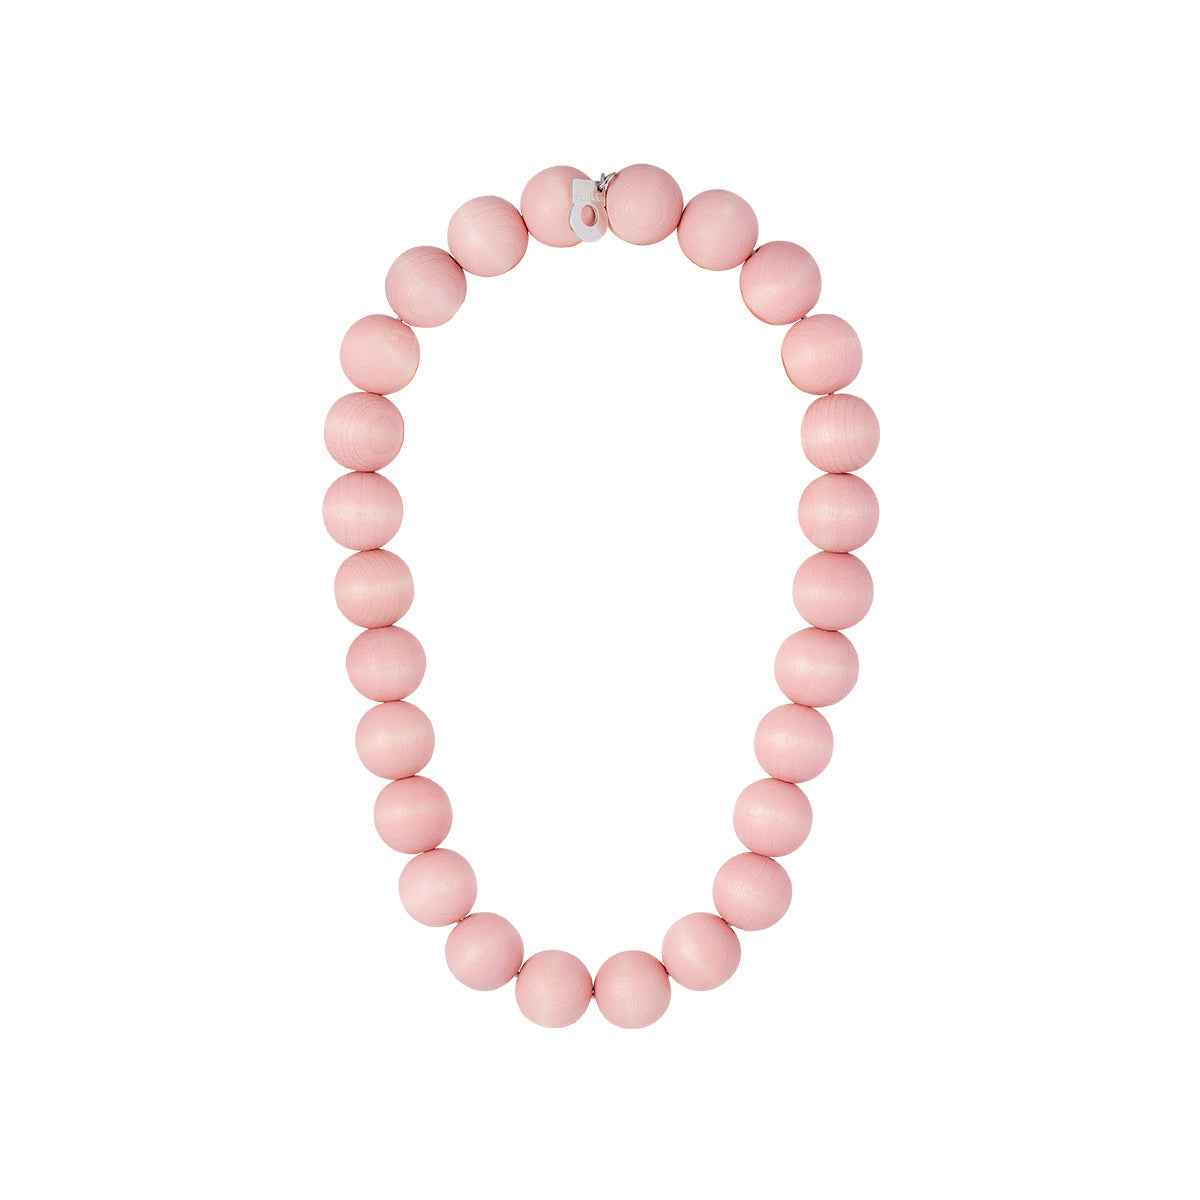 Suomi necklace, light pink